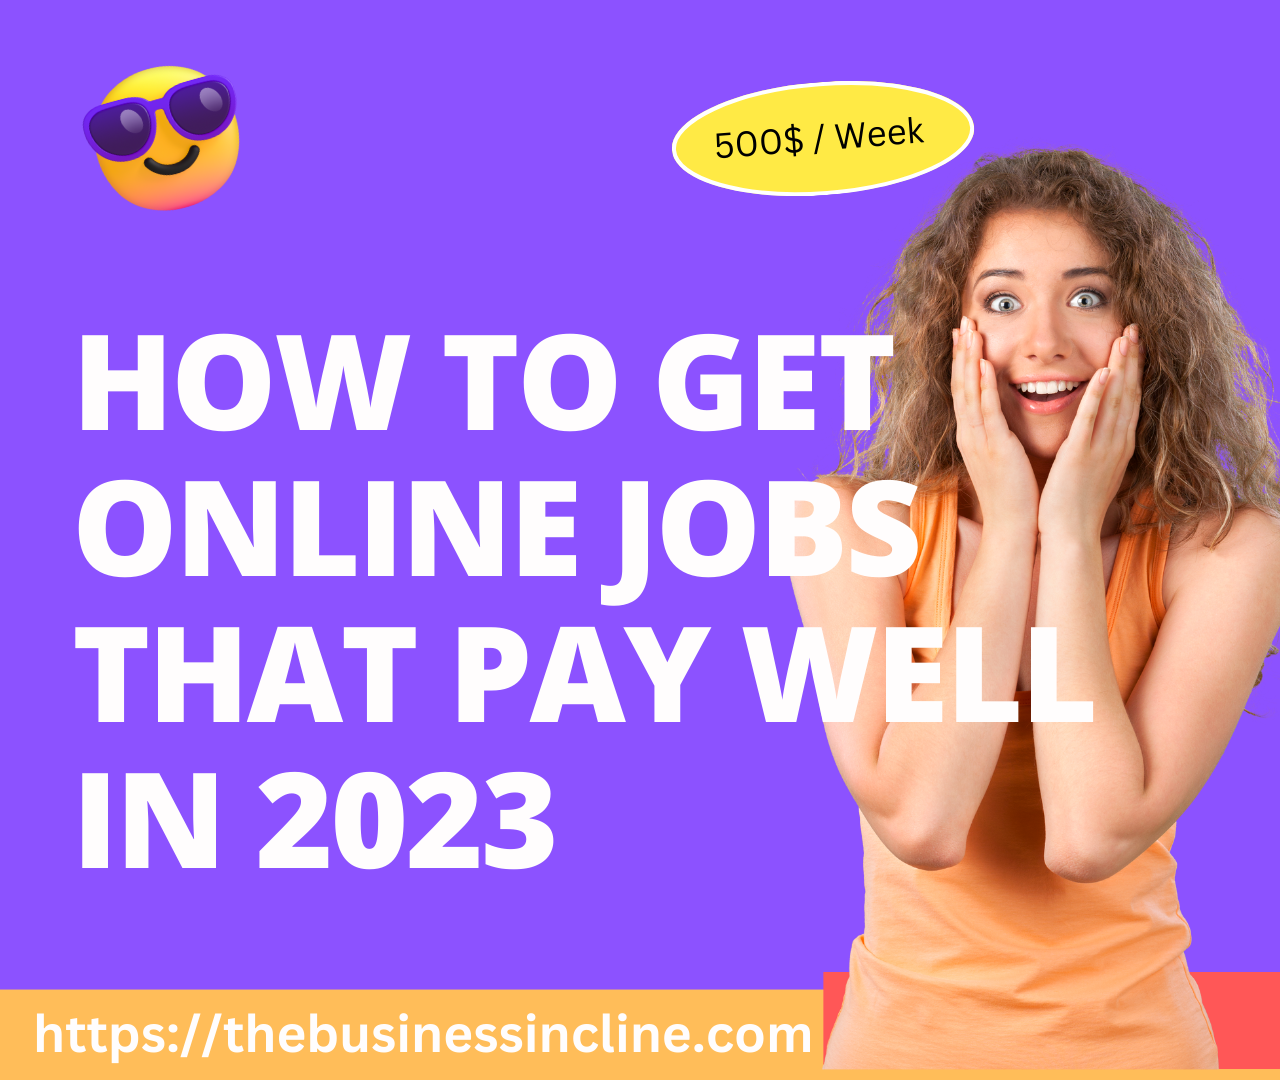 How To Get Online Jobs That Pay well In 2023